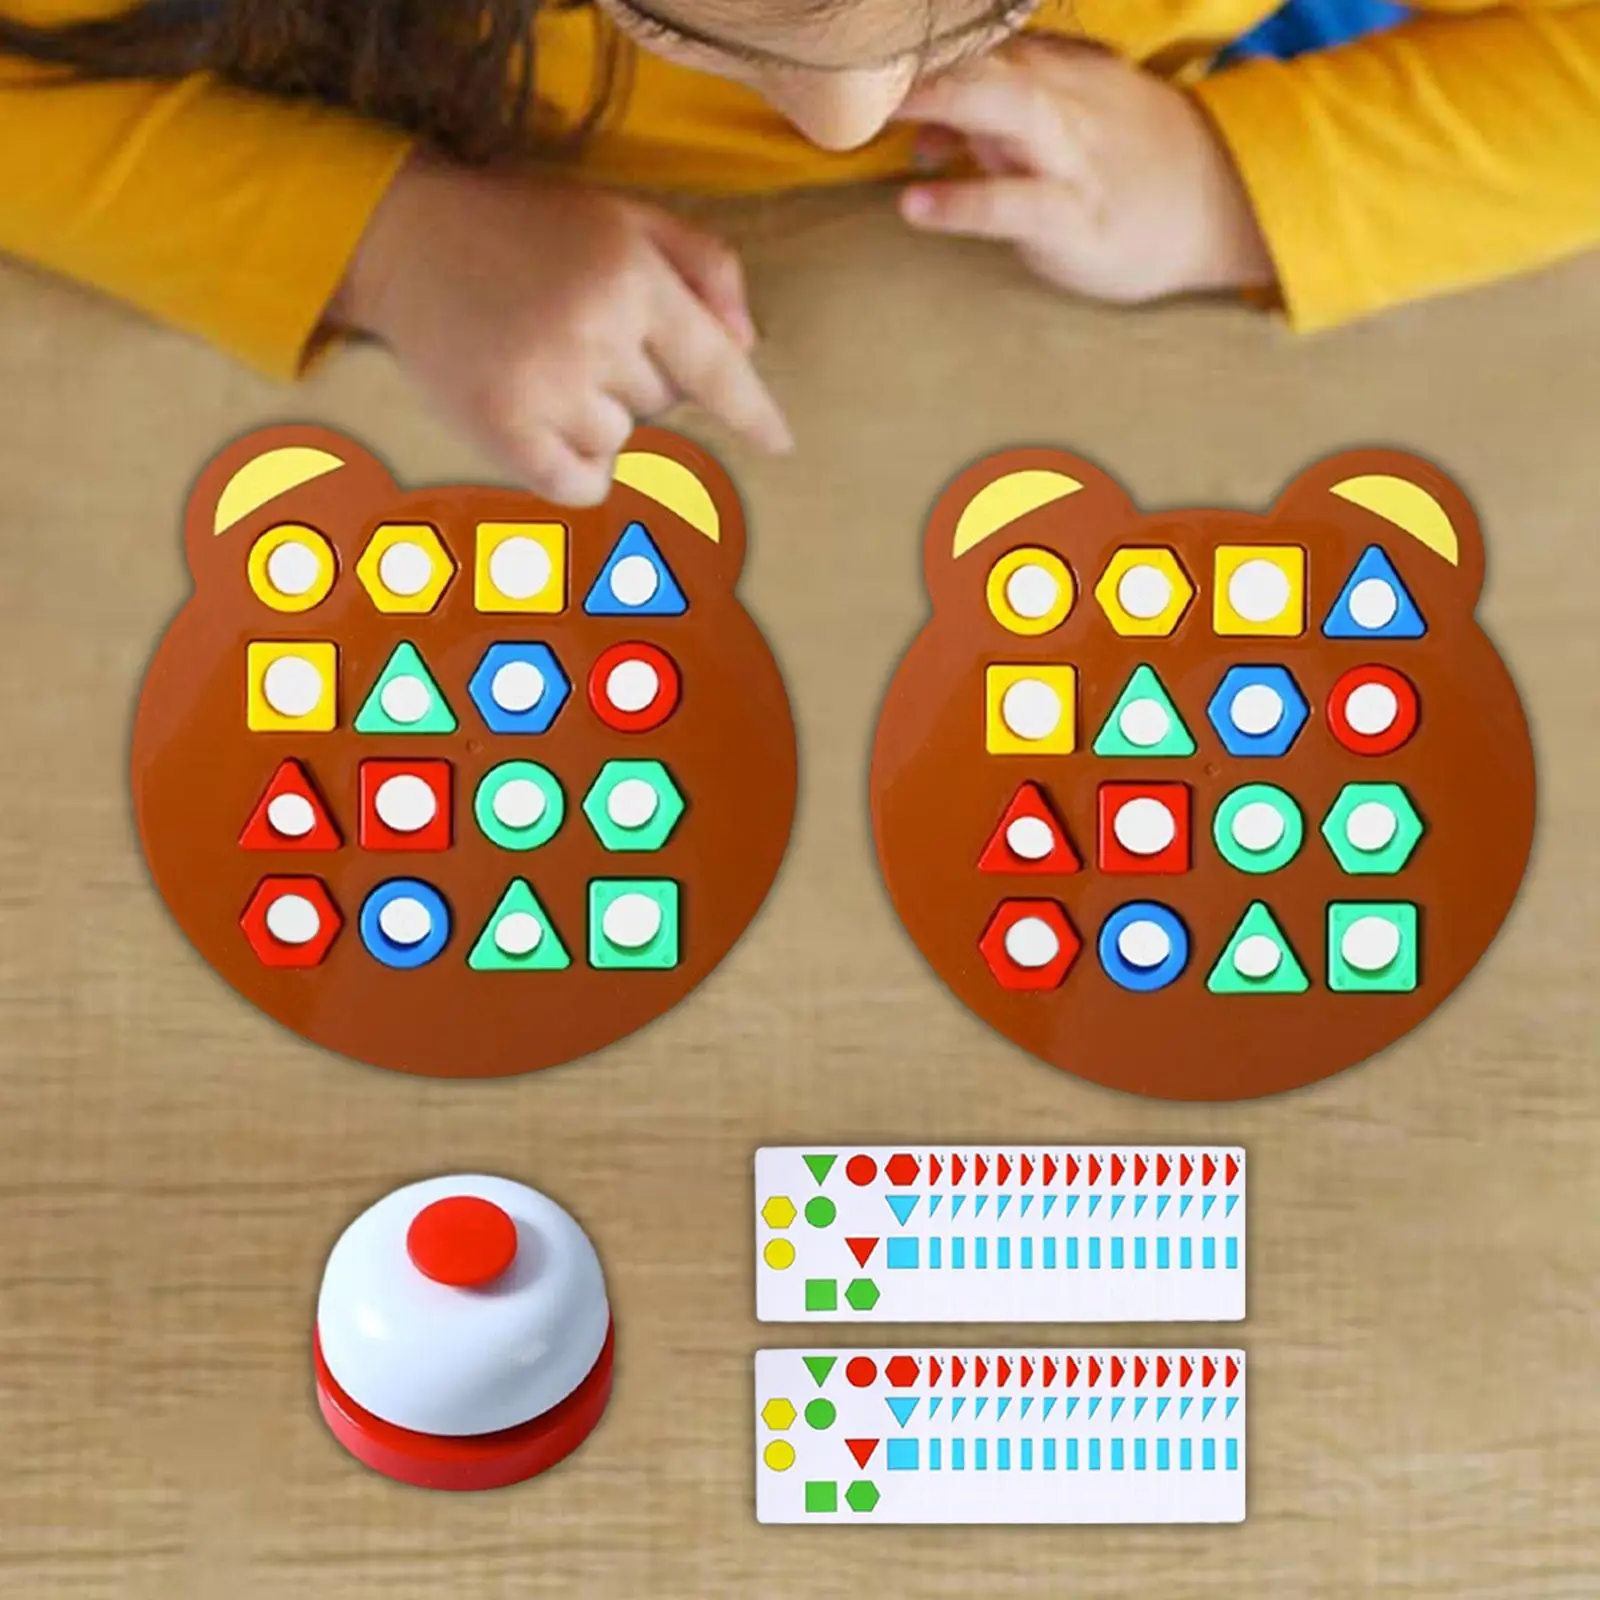 Shape Quick Matching Board, Shape Matching Game, Color Sensory Educational Toy for Kids